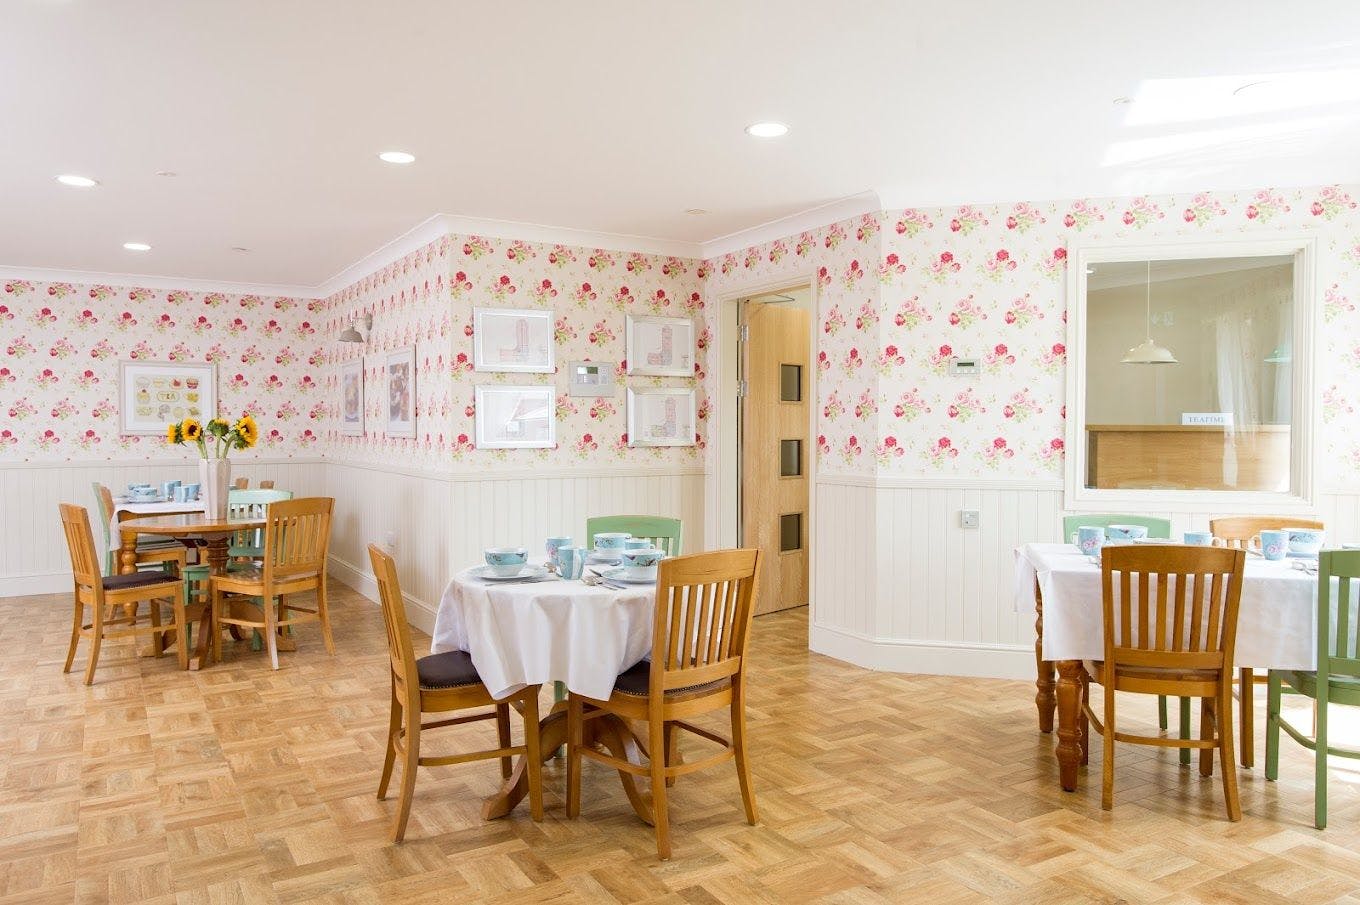 Dining Room at Barony Lodge Care Home in Nantwich, Cheshire